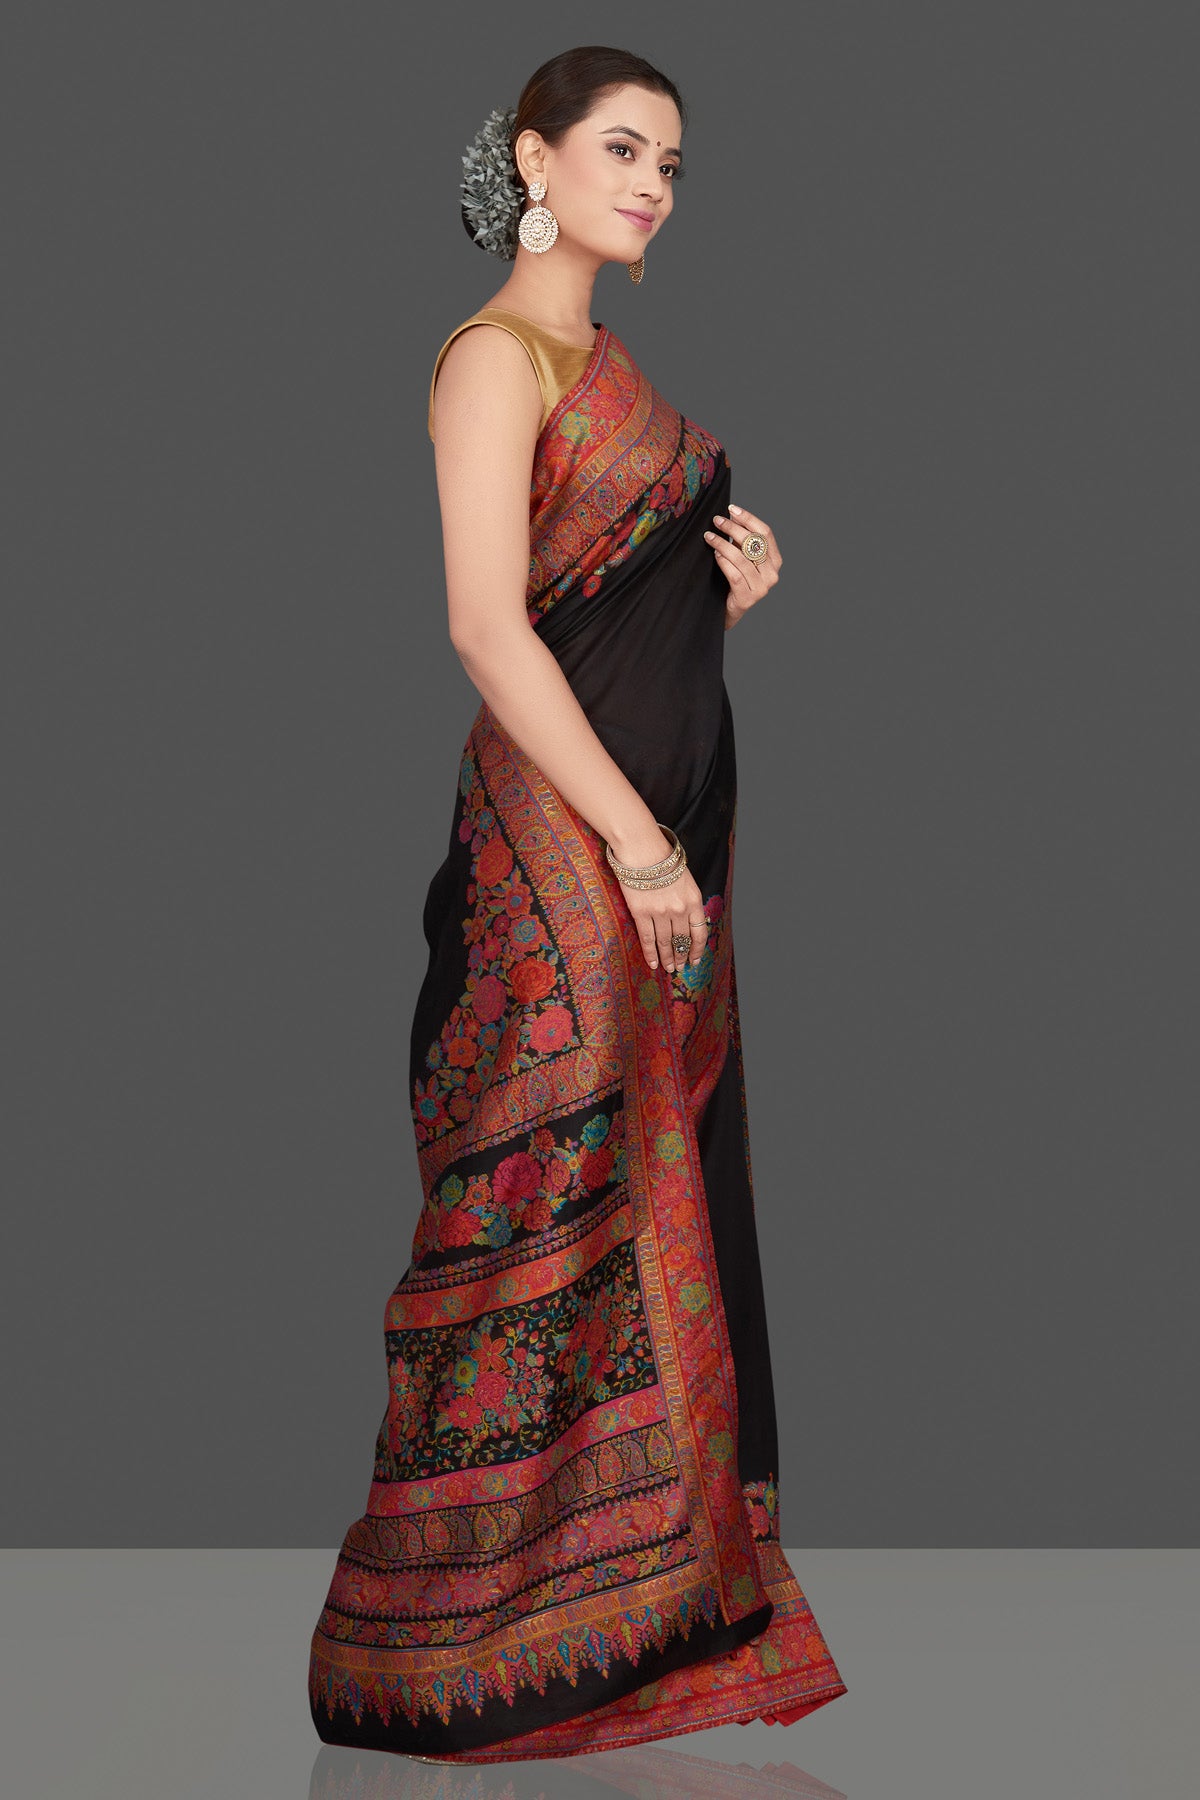 Buy stunning black tussar muga silk saree online in USA with Kani embroidery border. Get ready for festive occasions and weddings in tasteful designer sarees, Banarasi sarees, handwoven sarees from Pure Elegance Indian clothing store in USA.-right